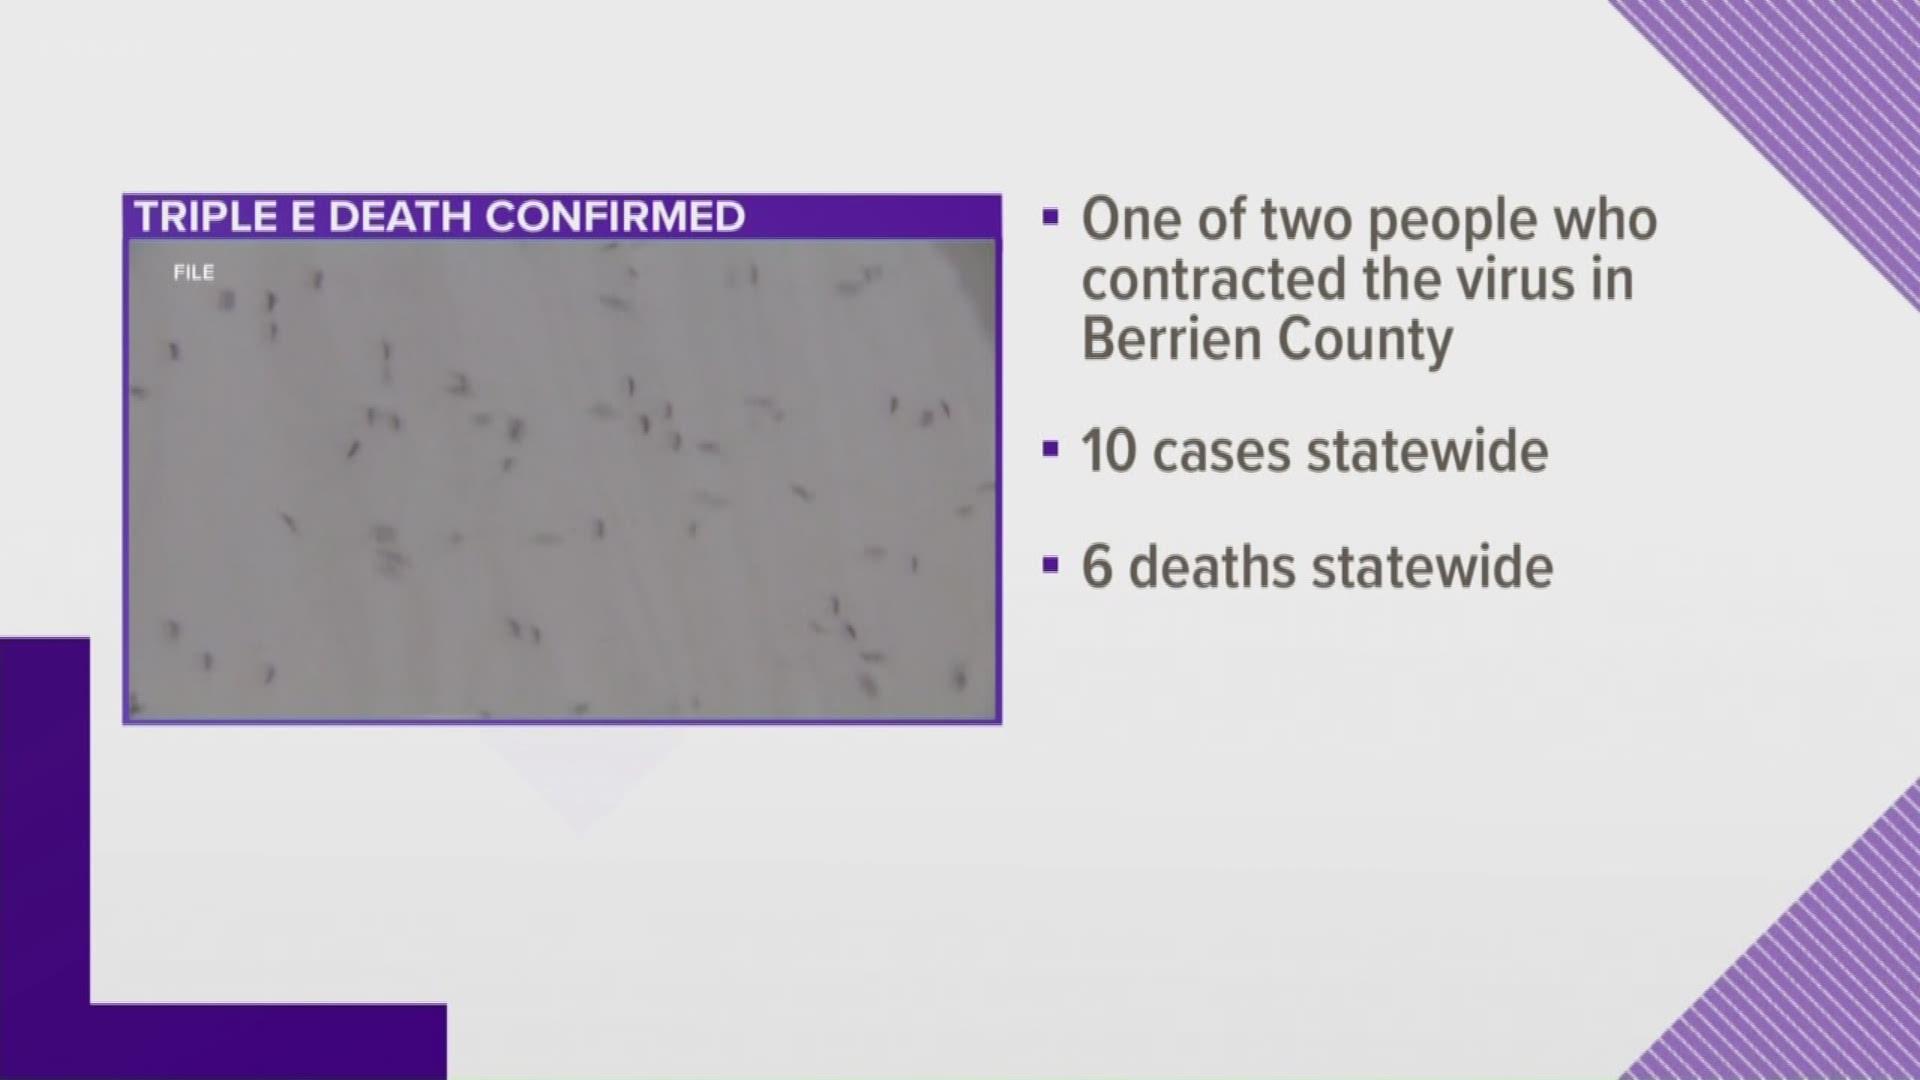 This year's outbreak has hit Michigan particularly hard with 10 human cases and 46 animal cases.